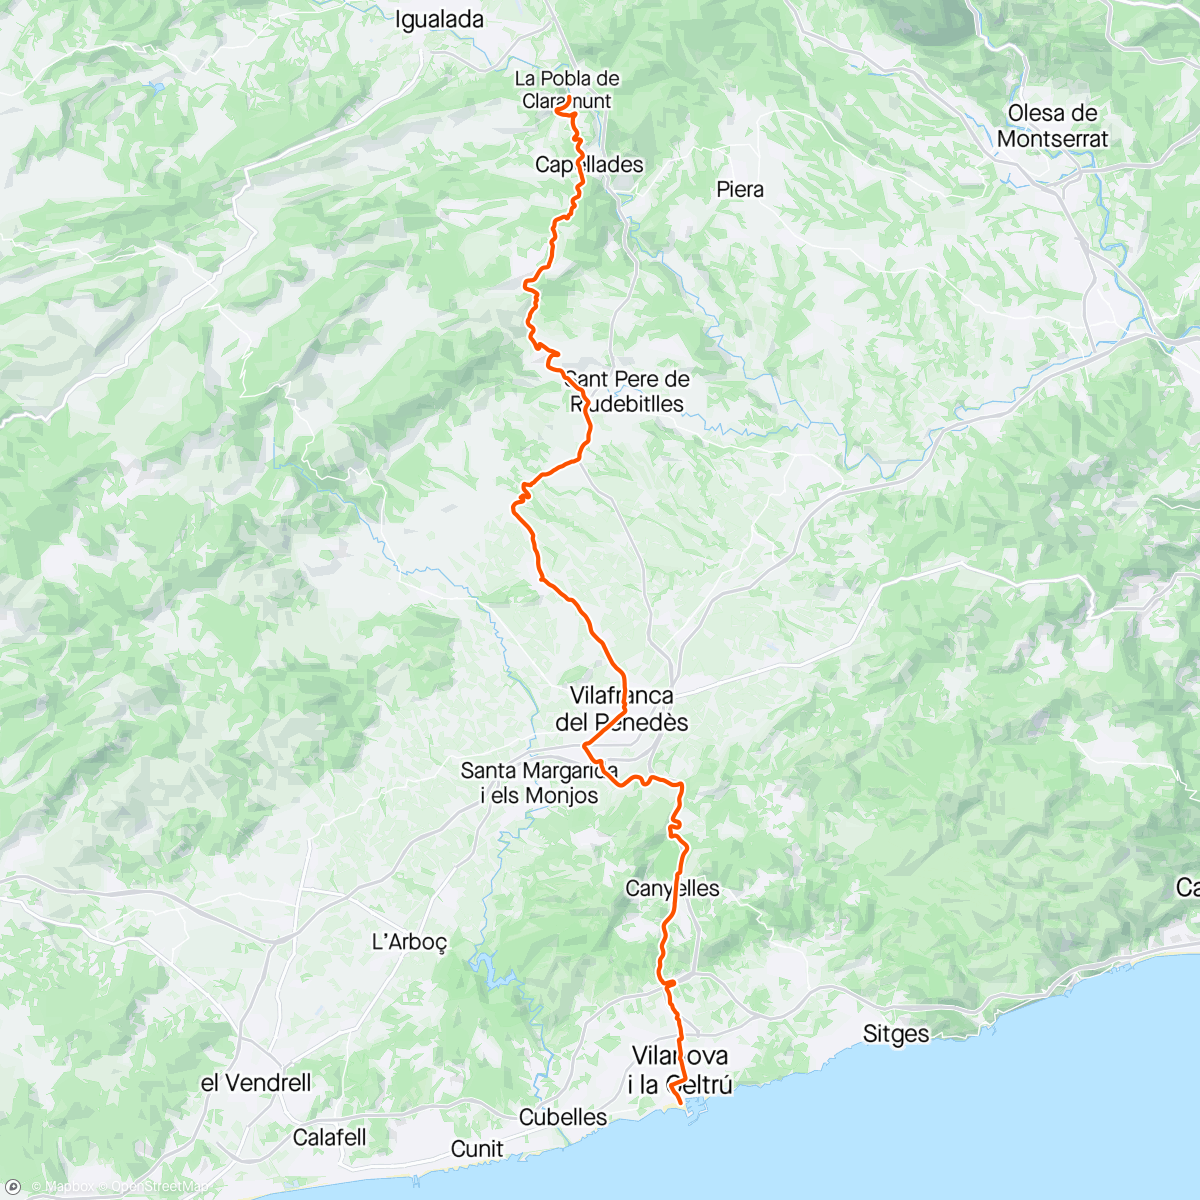 Map of the activity, Birmingham to Mallorca -we made it to Barcelona- windy but warm- 953 miles so far done - rest in Mallorca